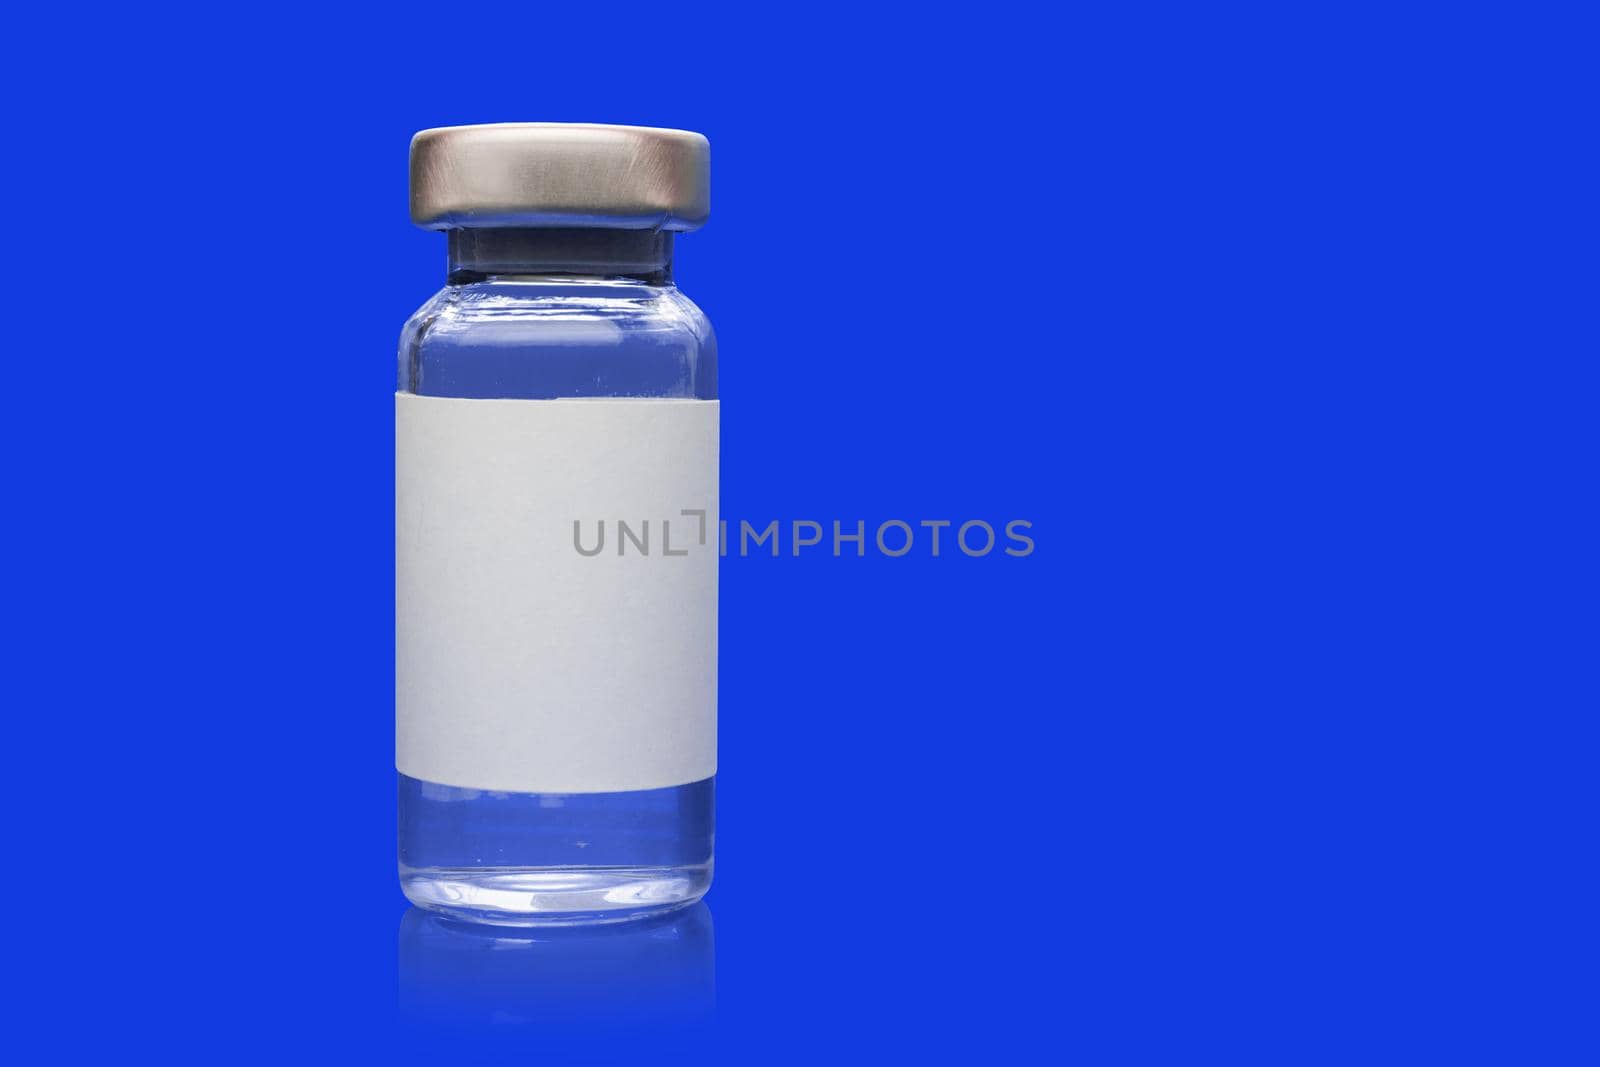 A vaccine vial bottle on a blue background by oasisamuel